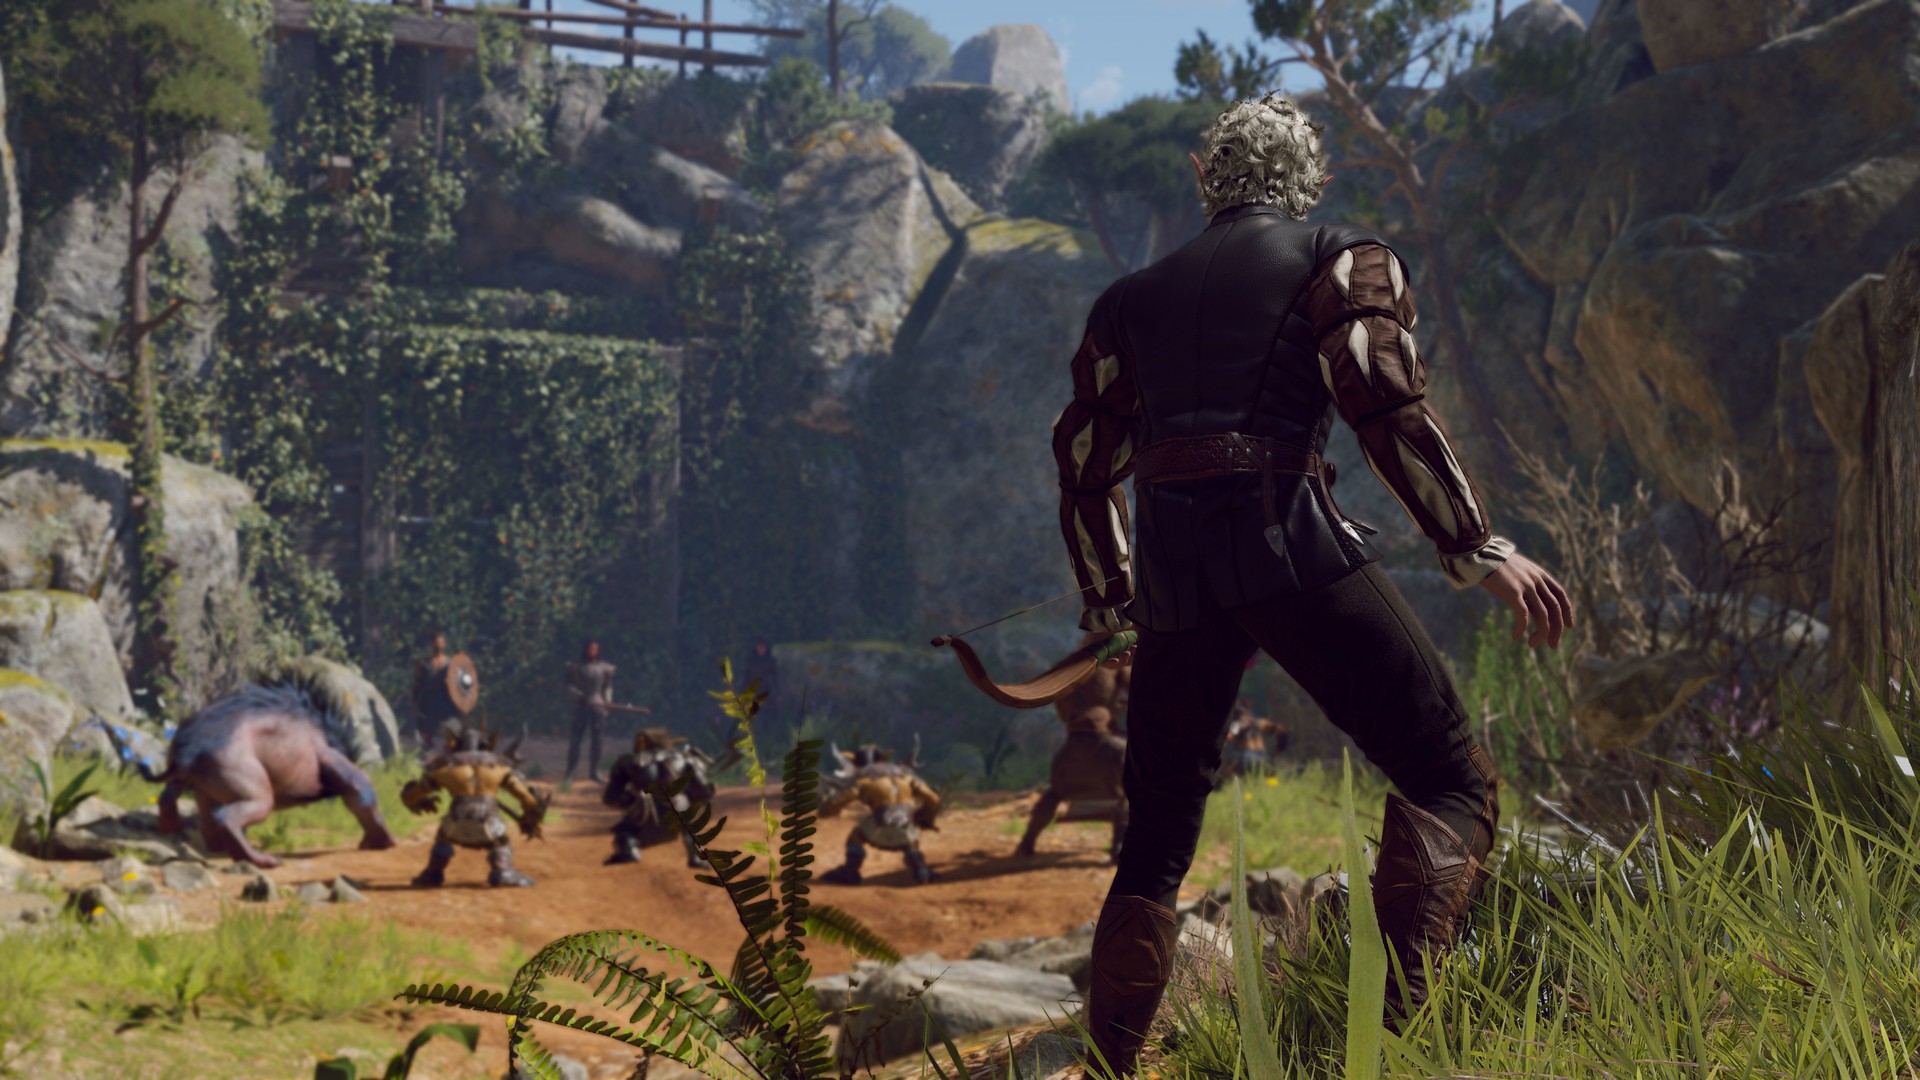 An over the shoulder shot of a standing, adult man with silver, short curly hair and pointed ears, wearing an outfit coordinated with leather accessories and slacks and boots. He is holding an archer's bow with a slightly cautious stance. He faces a gathering of monsters and fiends, standing in the distance further in the background.